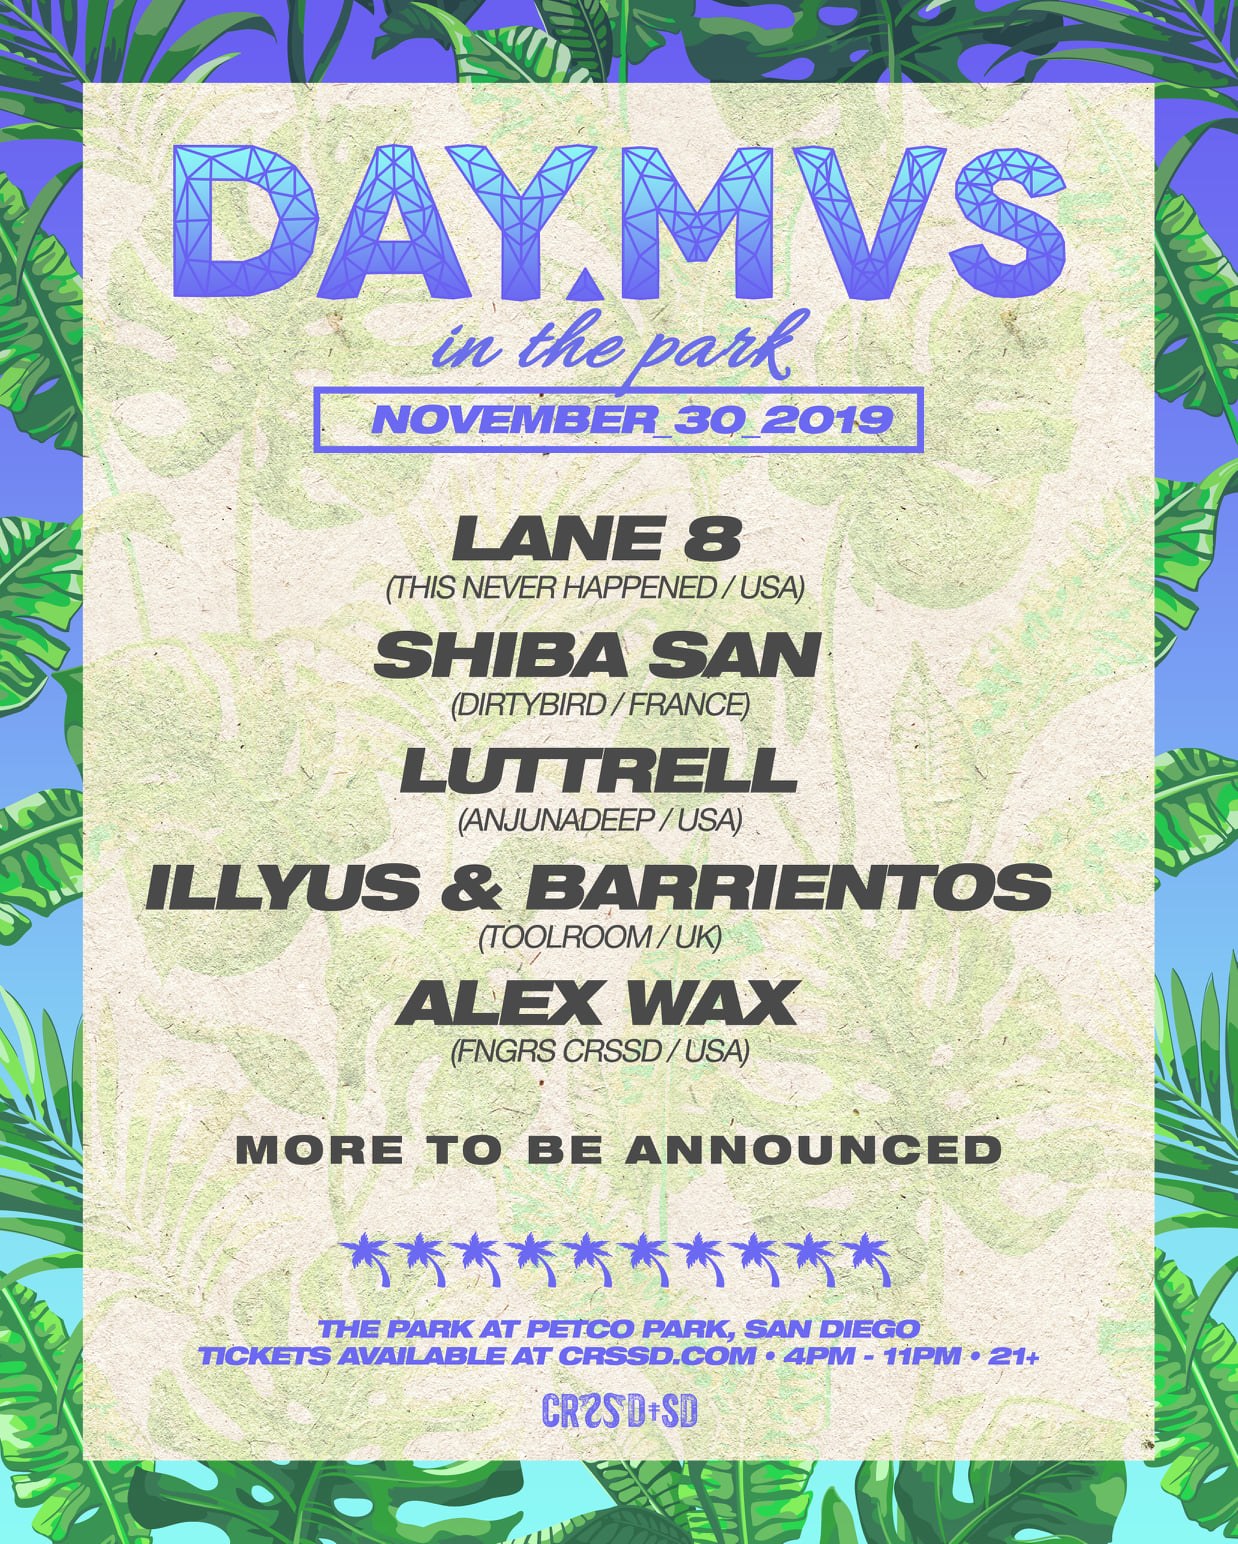 DAY MVS in the Park 2019 Phase 1 Lineup